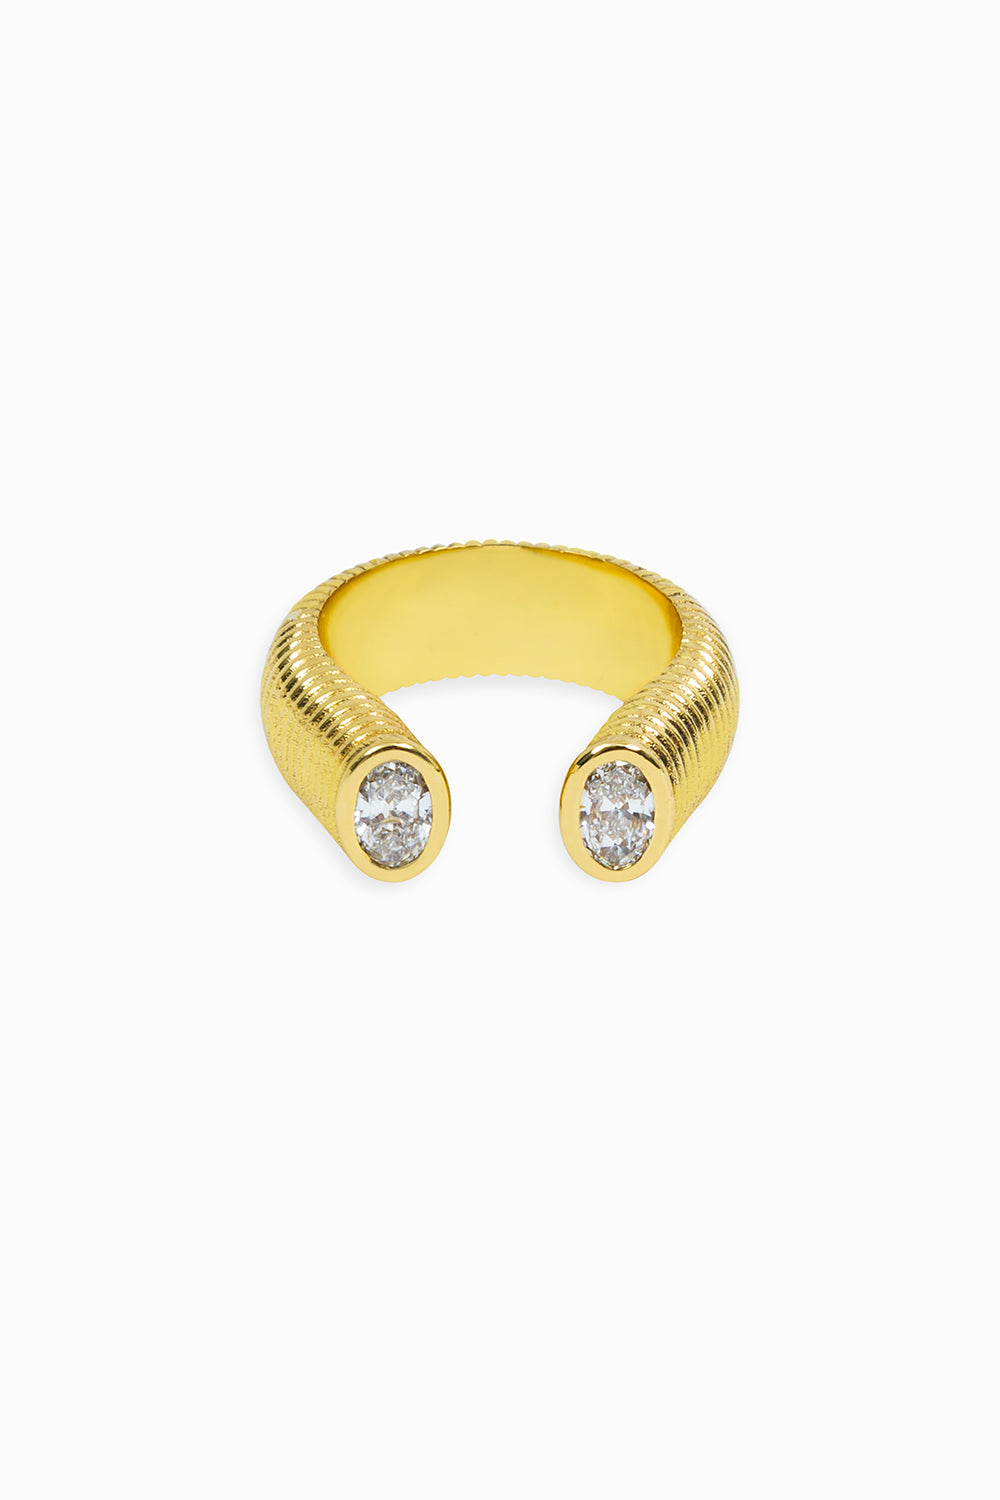 Cabo & oval diamonds ring